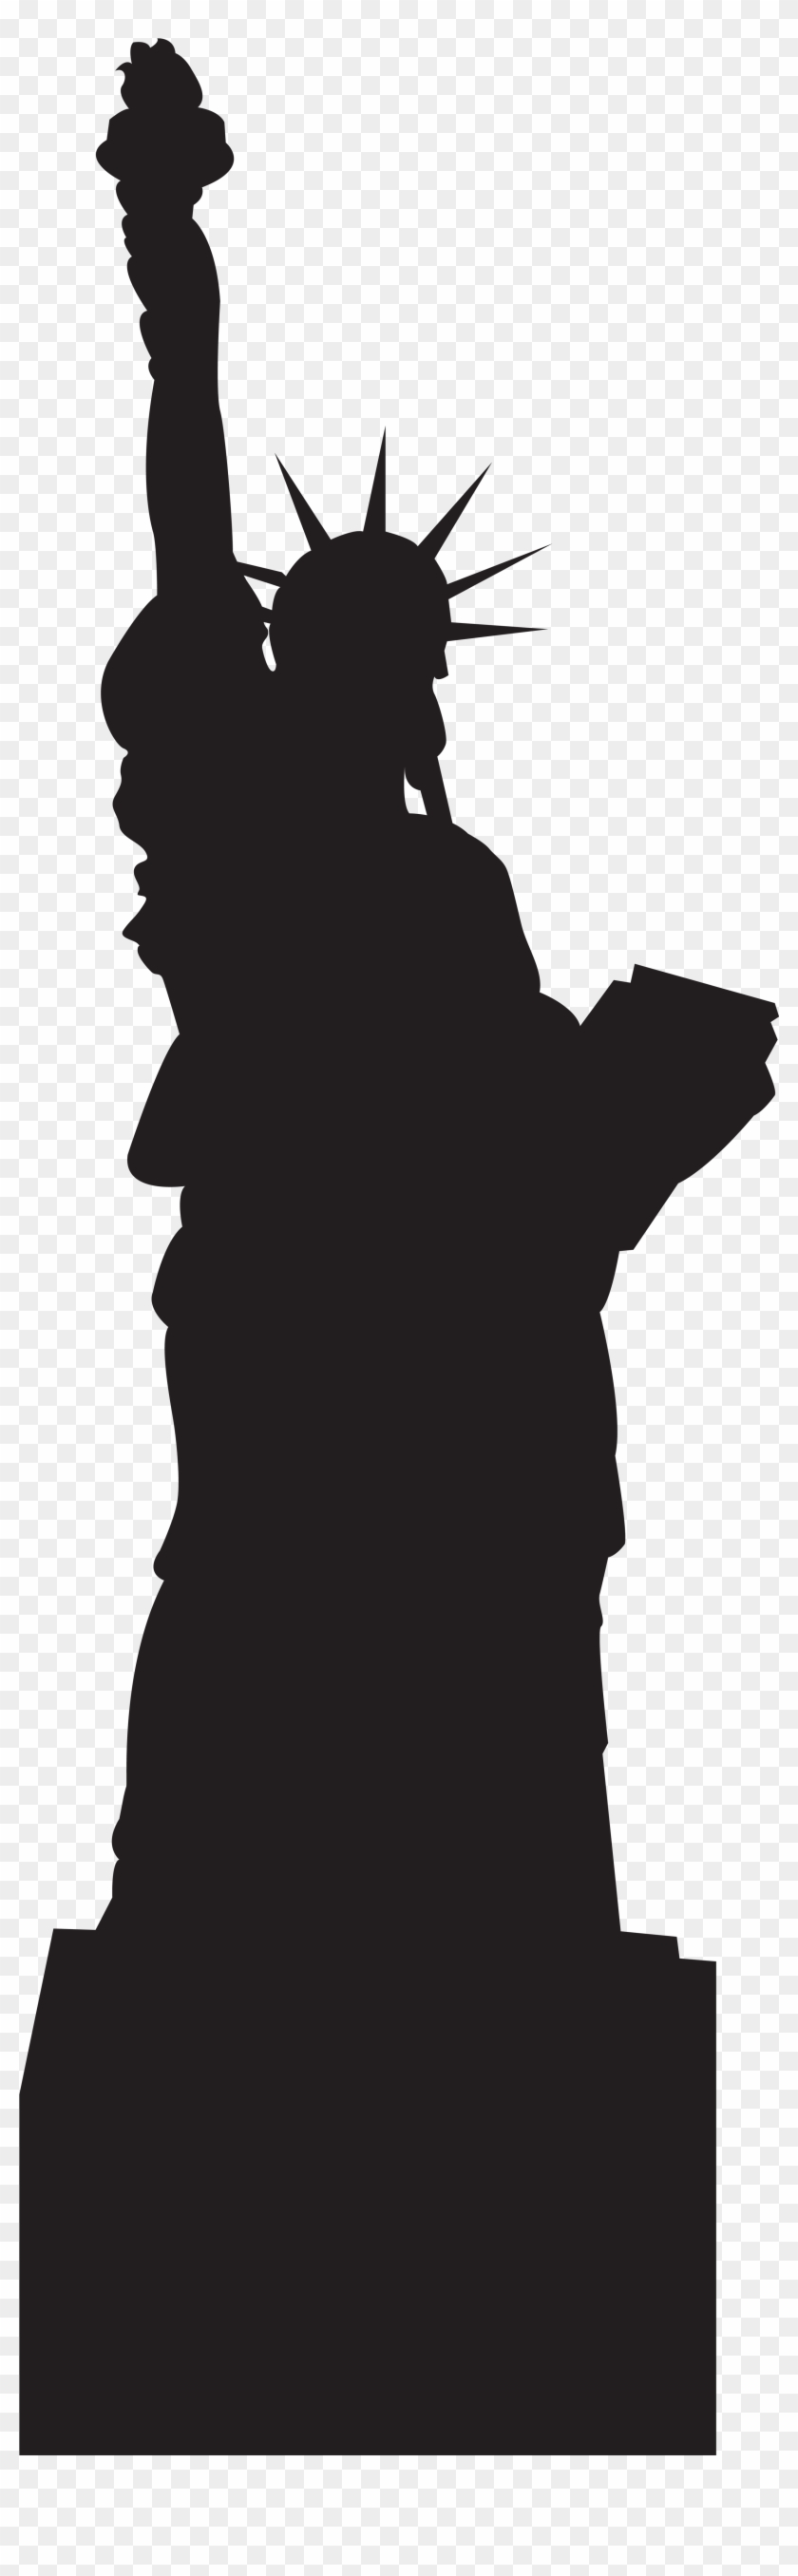 Statue Of Liberty Silhouette Clipart, HD Png Download